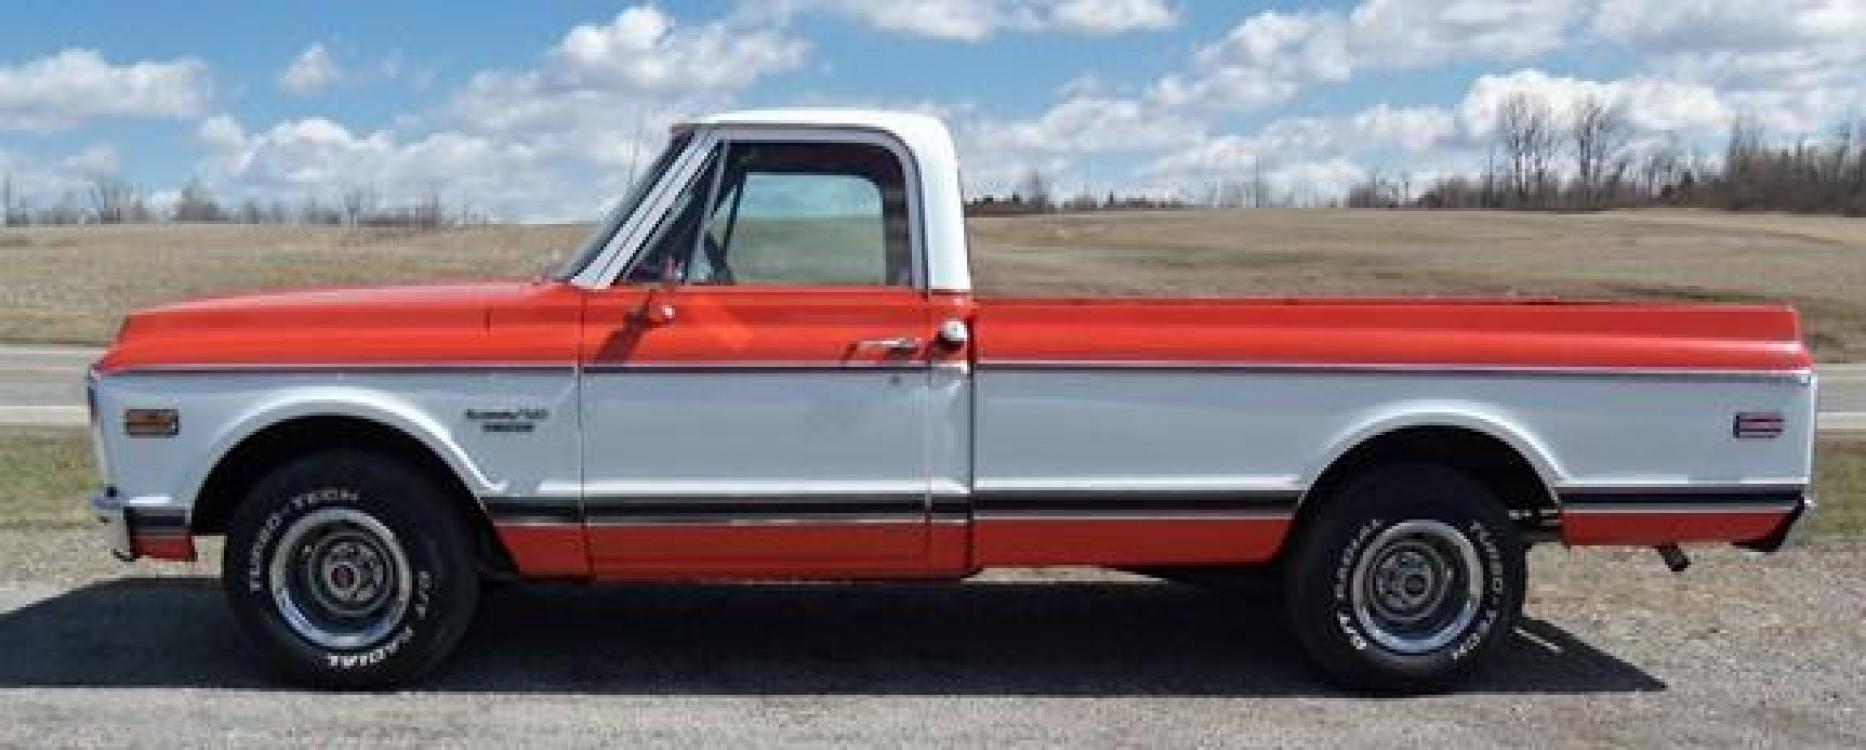 1970 Orange/White Chevrolet C10 with an 328 V8 engine, located at 1725 US-68 N, Bellefontaine, OH, 43311, (937) 592-5466, 40.387783, -83.752388 - 1970 CHEVROLET C10 CUSTOM ½ T Pick-up, High-performance “383 Stroker” V-8 w-headers Auto, Orange w-white Inserts, Black Lth Interior, custom wood steering wheel, PS, PB, Retro AM-FM-CD, gauges, dual exhaust, rally rims w-white letter tires, chrome bumpers & grille, Bed mat.	. Professionally wet - Photo #5